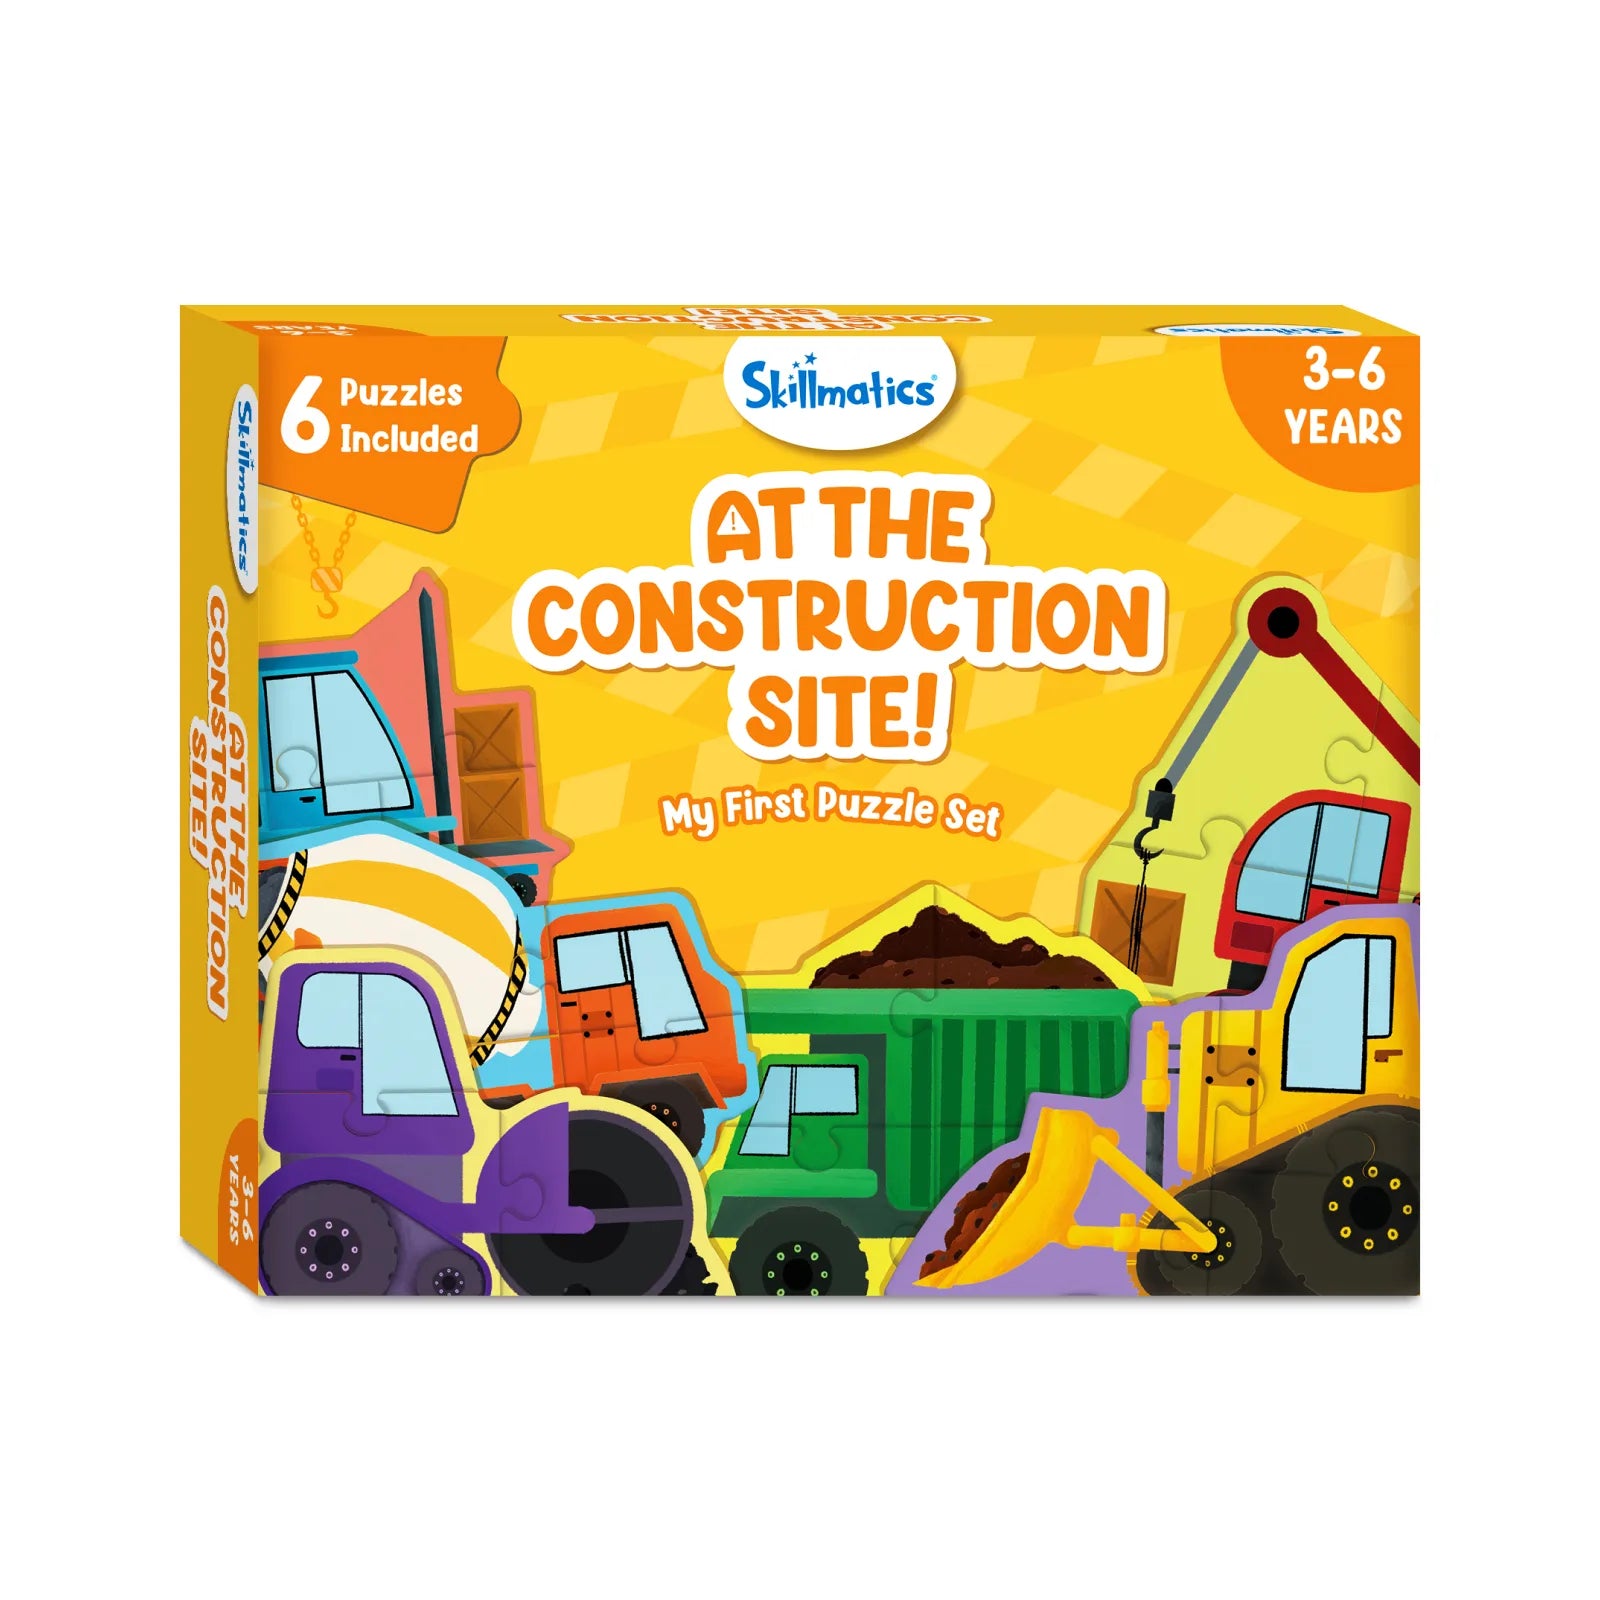 My First Puzzle Set: At The Construction Site (ages 3-6)